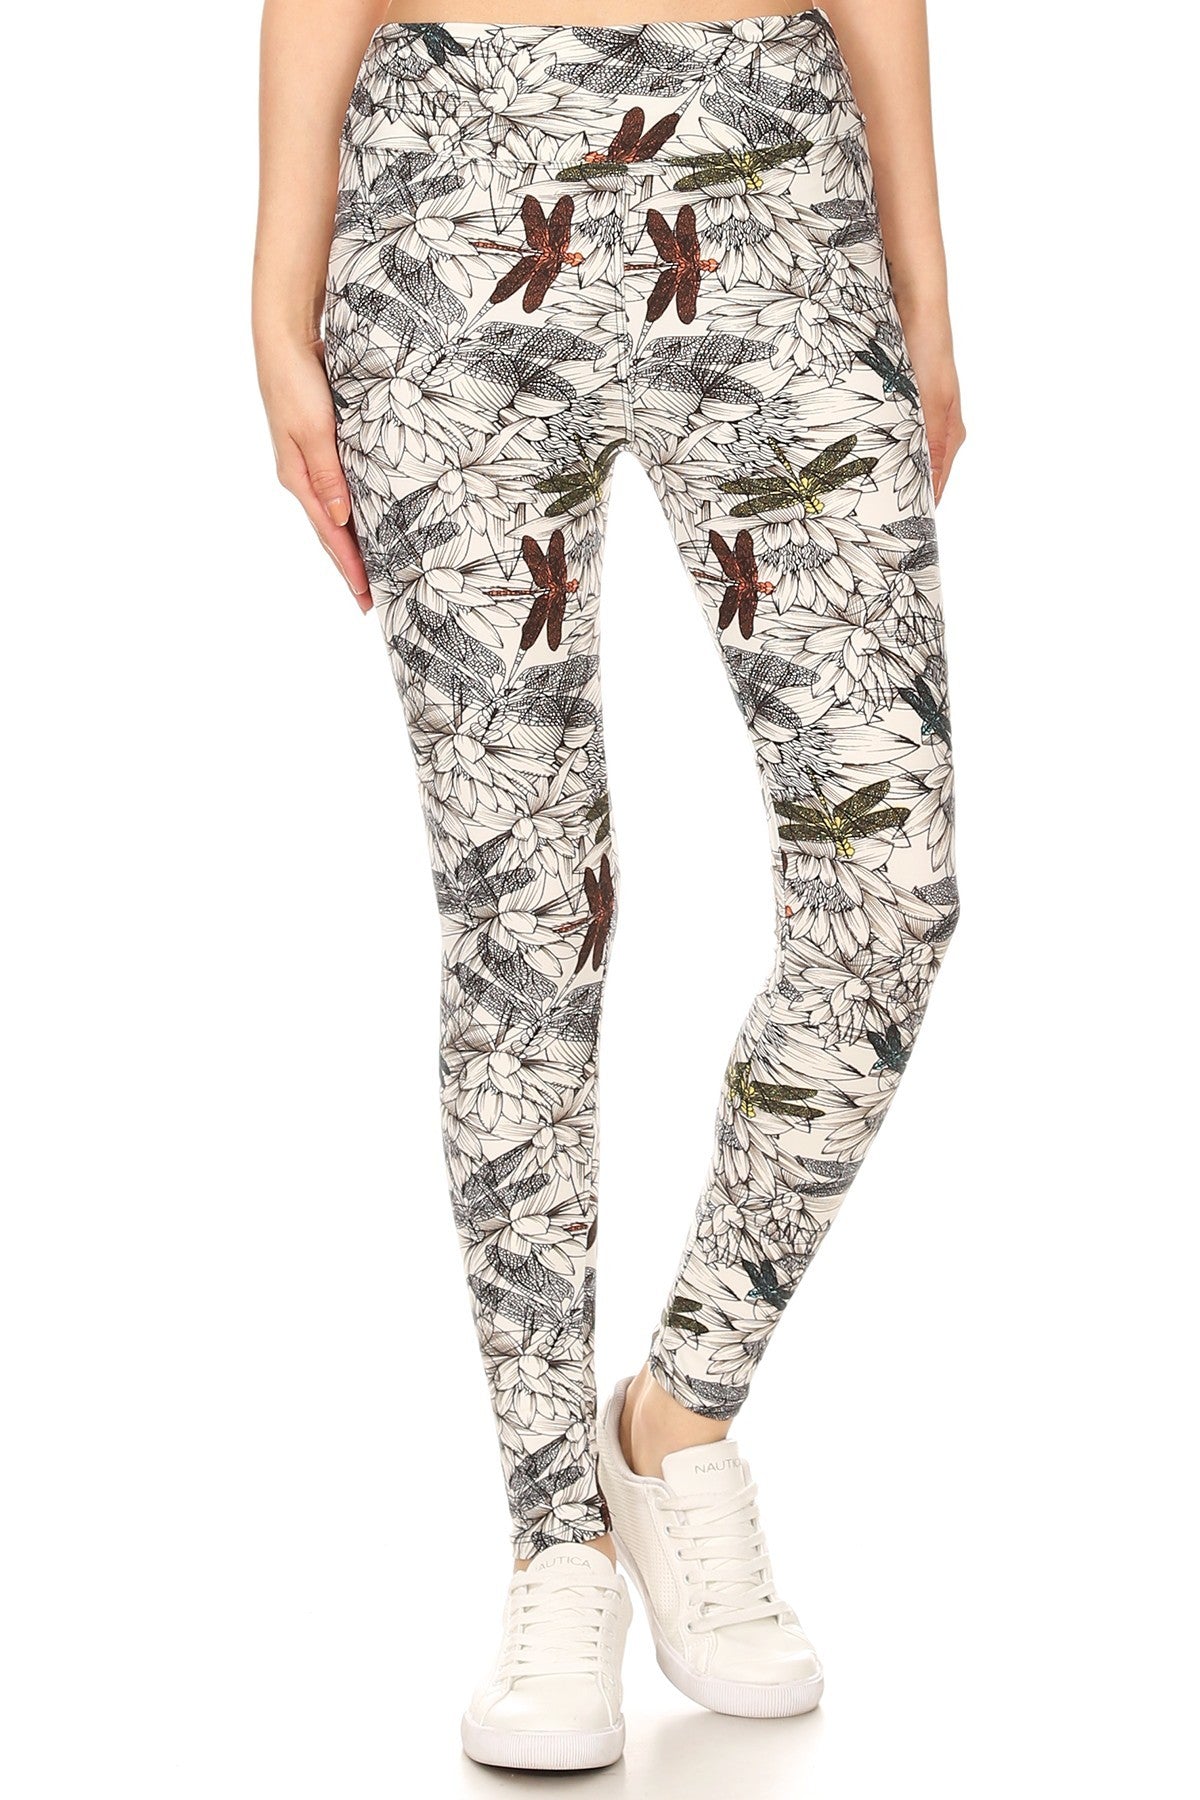 Yoga Style Banded Lined Dragonfly Print, Full Length Leggings In A Slim Fitting Style With A Banded High Waist - Tigbul's Fashion